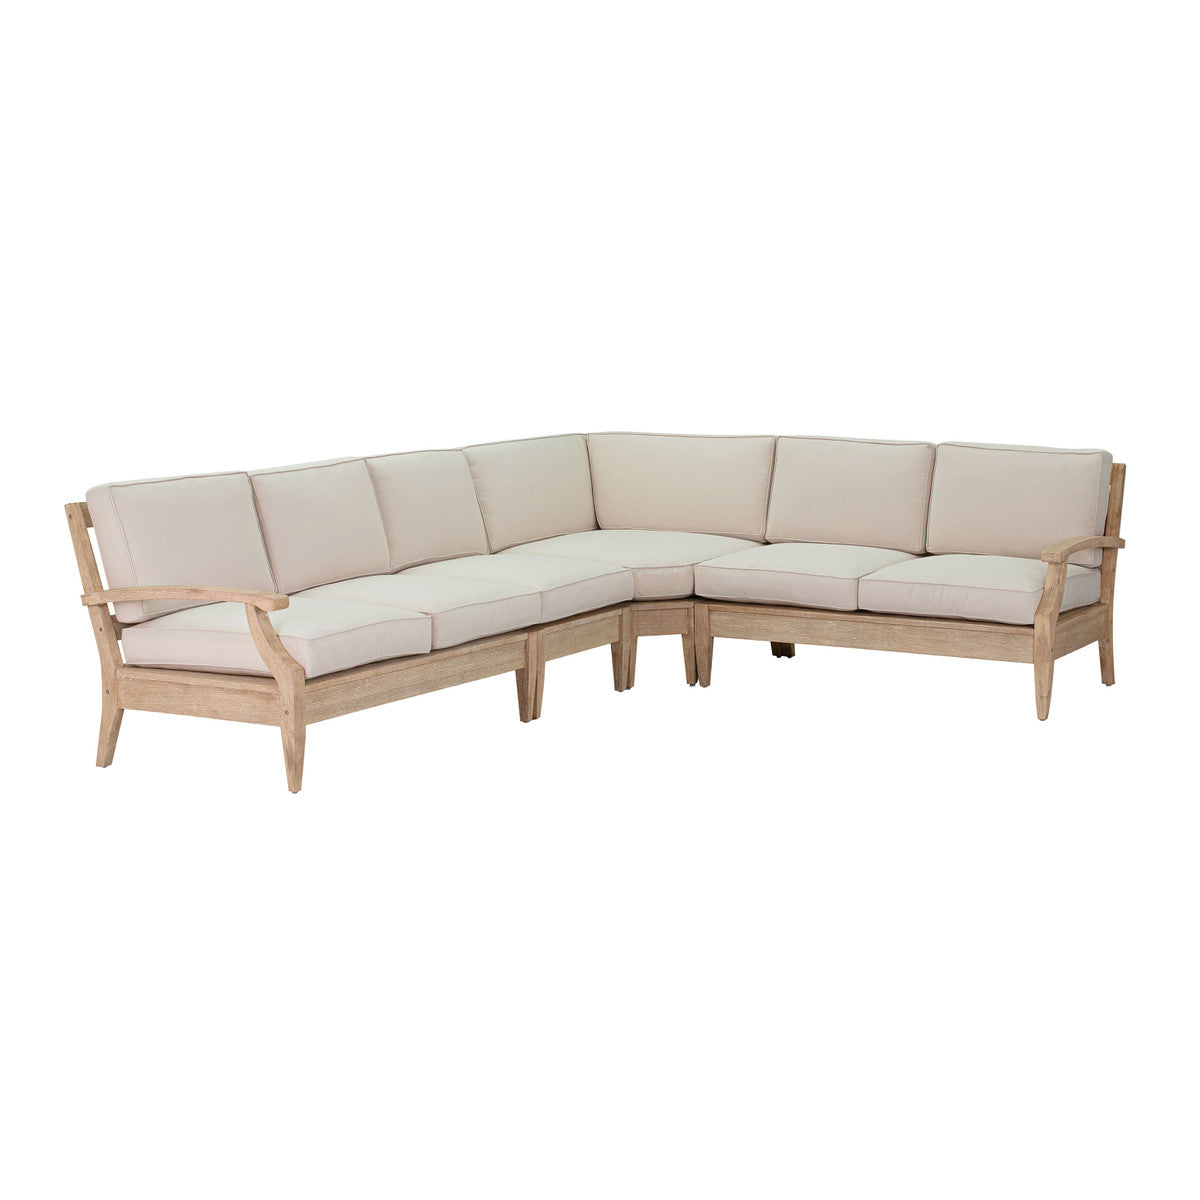 Waltz Natural Beige Large Outdoor Sectional - Luxury Living Collection